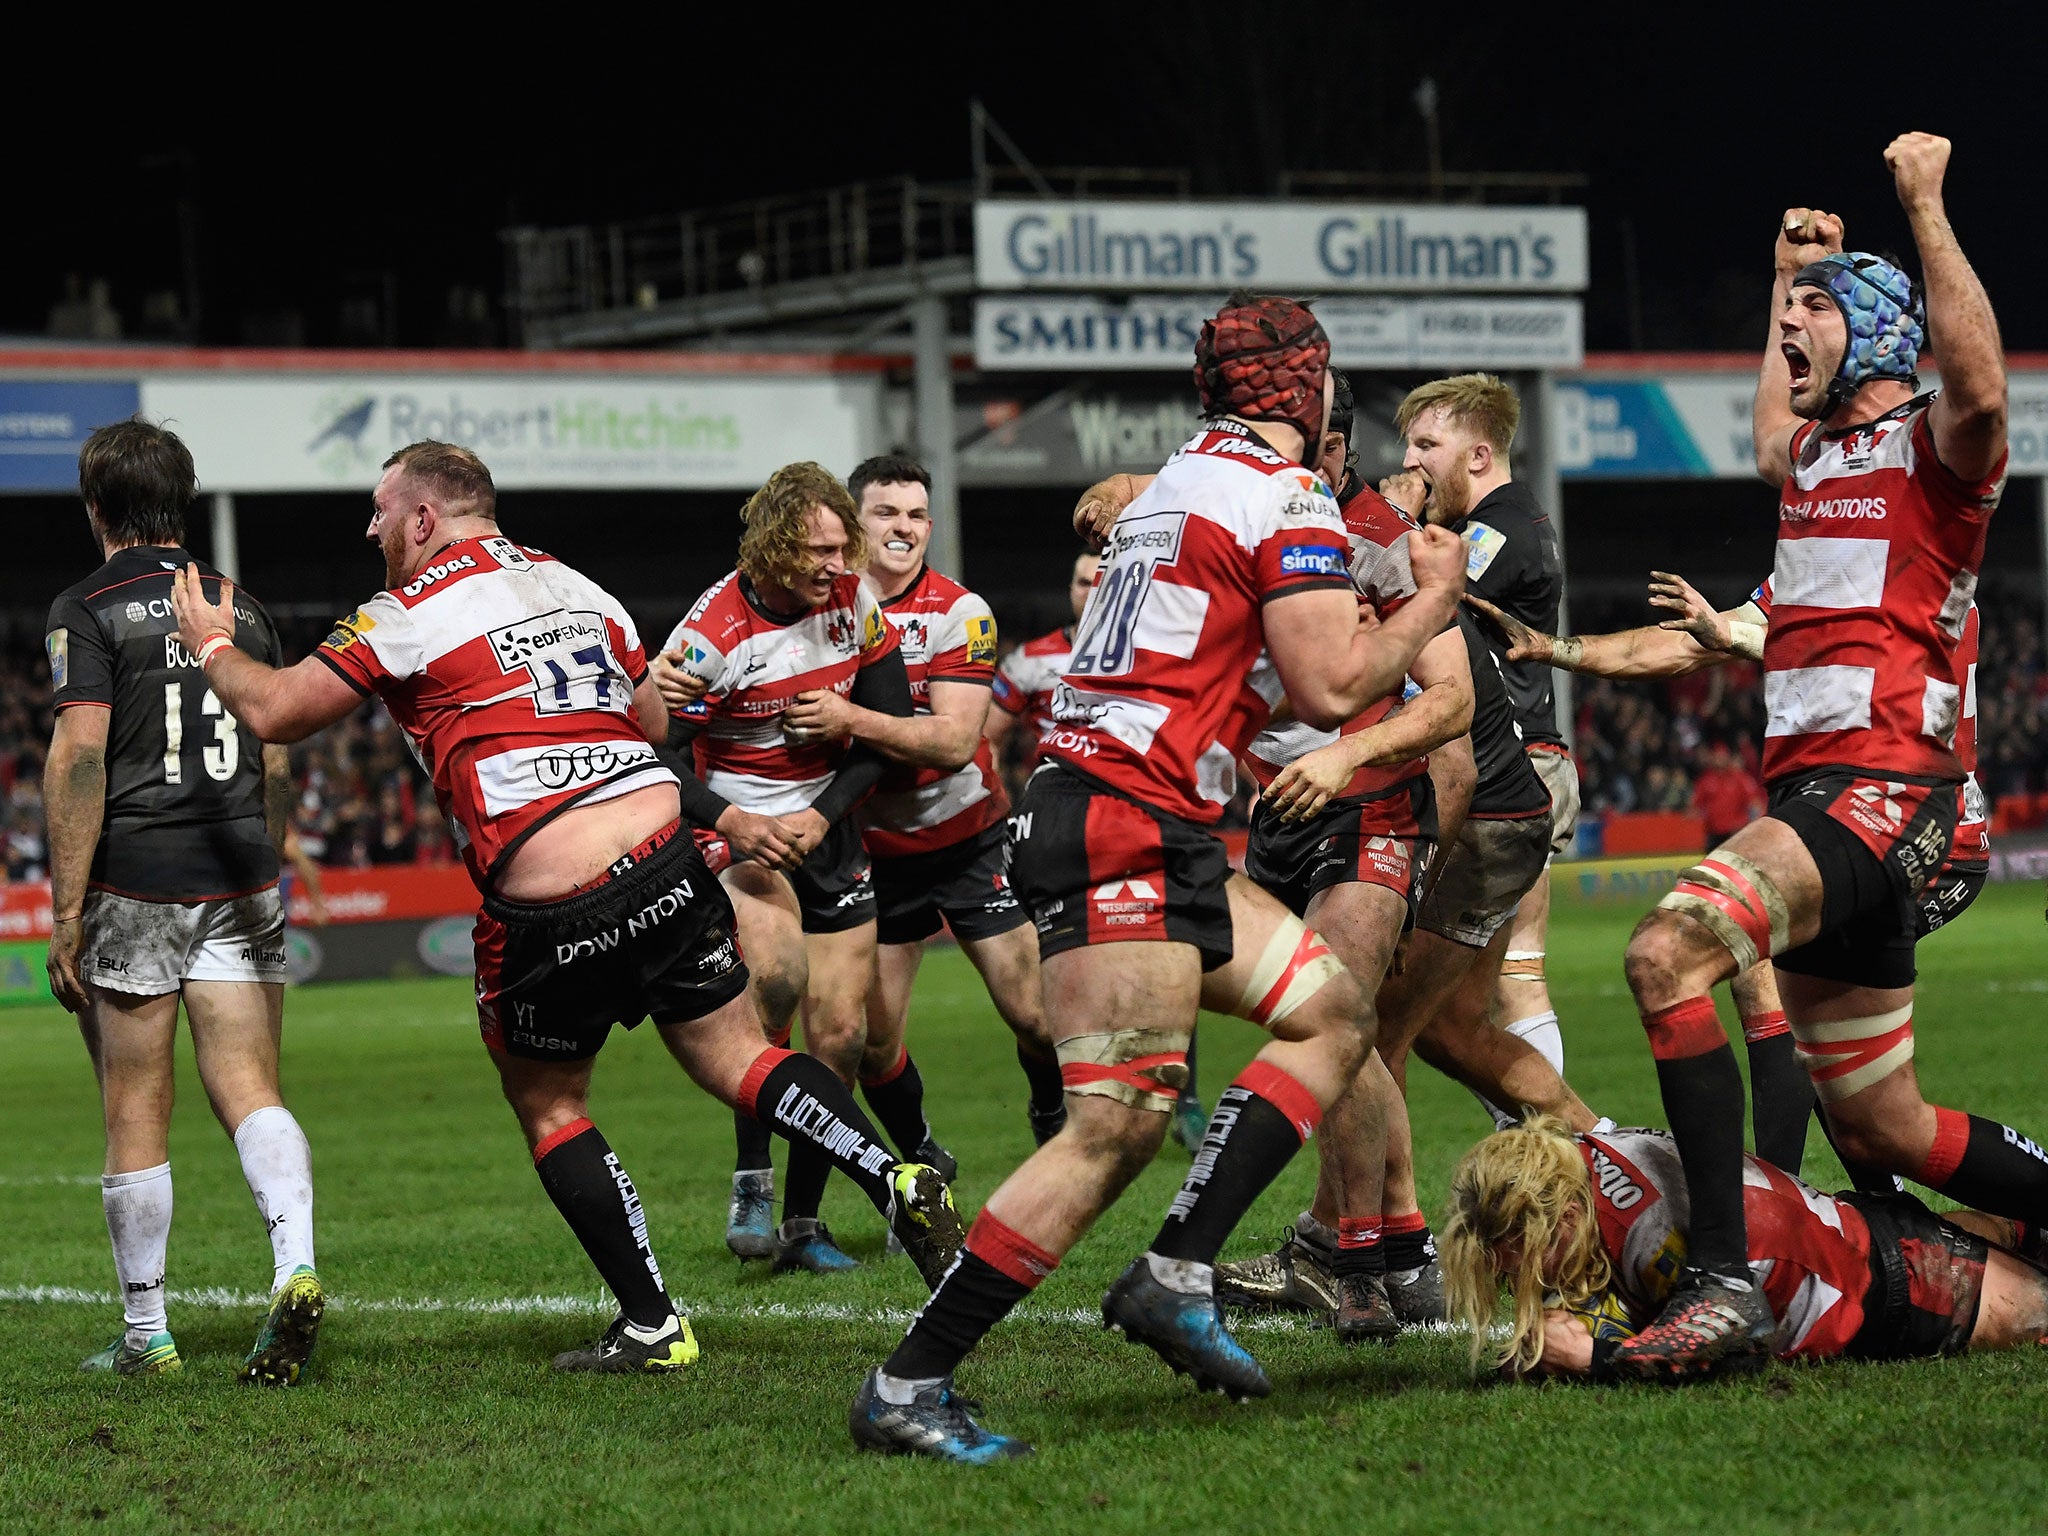 Gloucester's players celebrate after securing victory